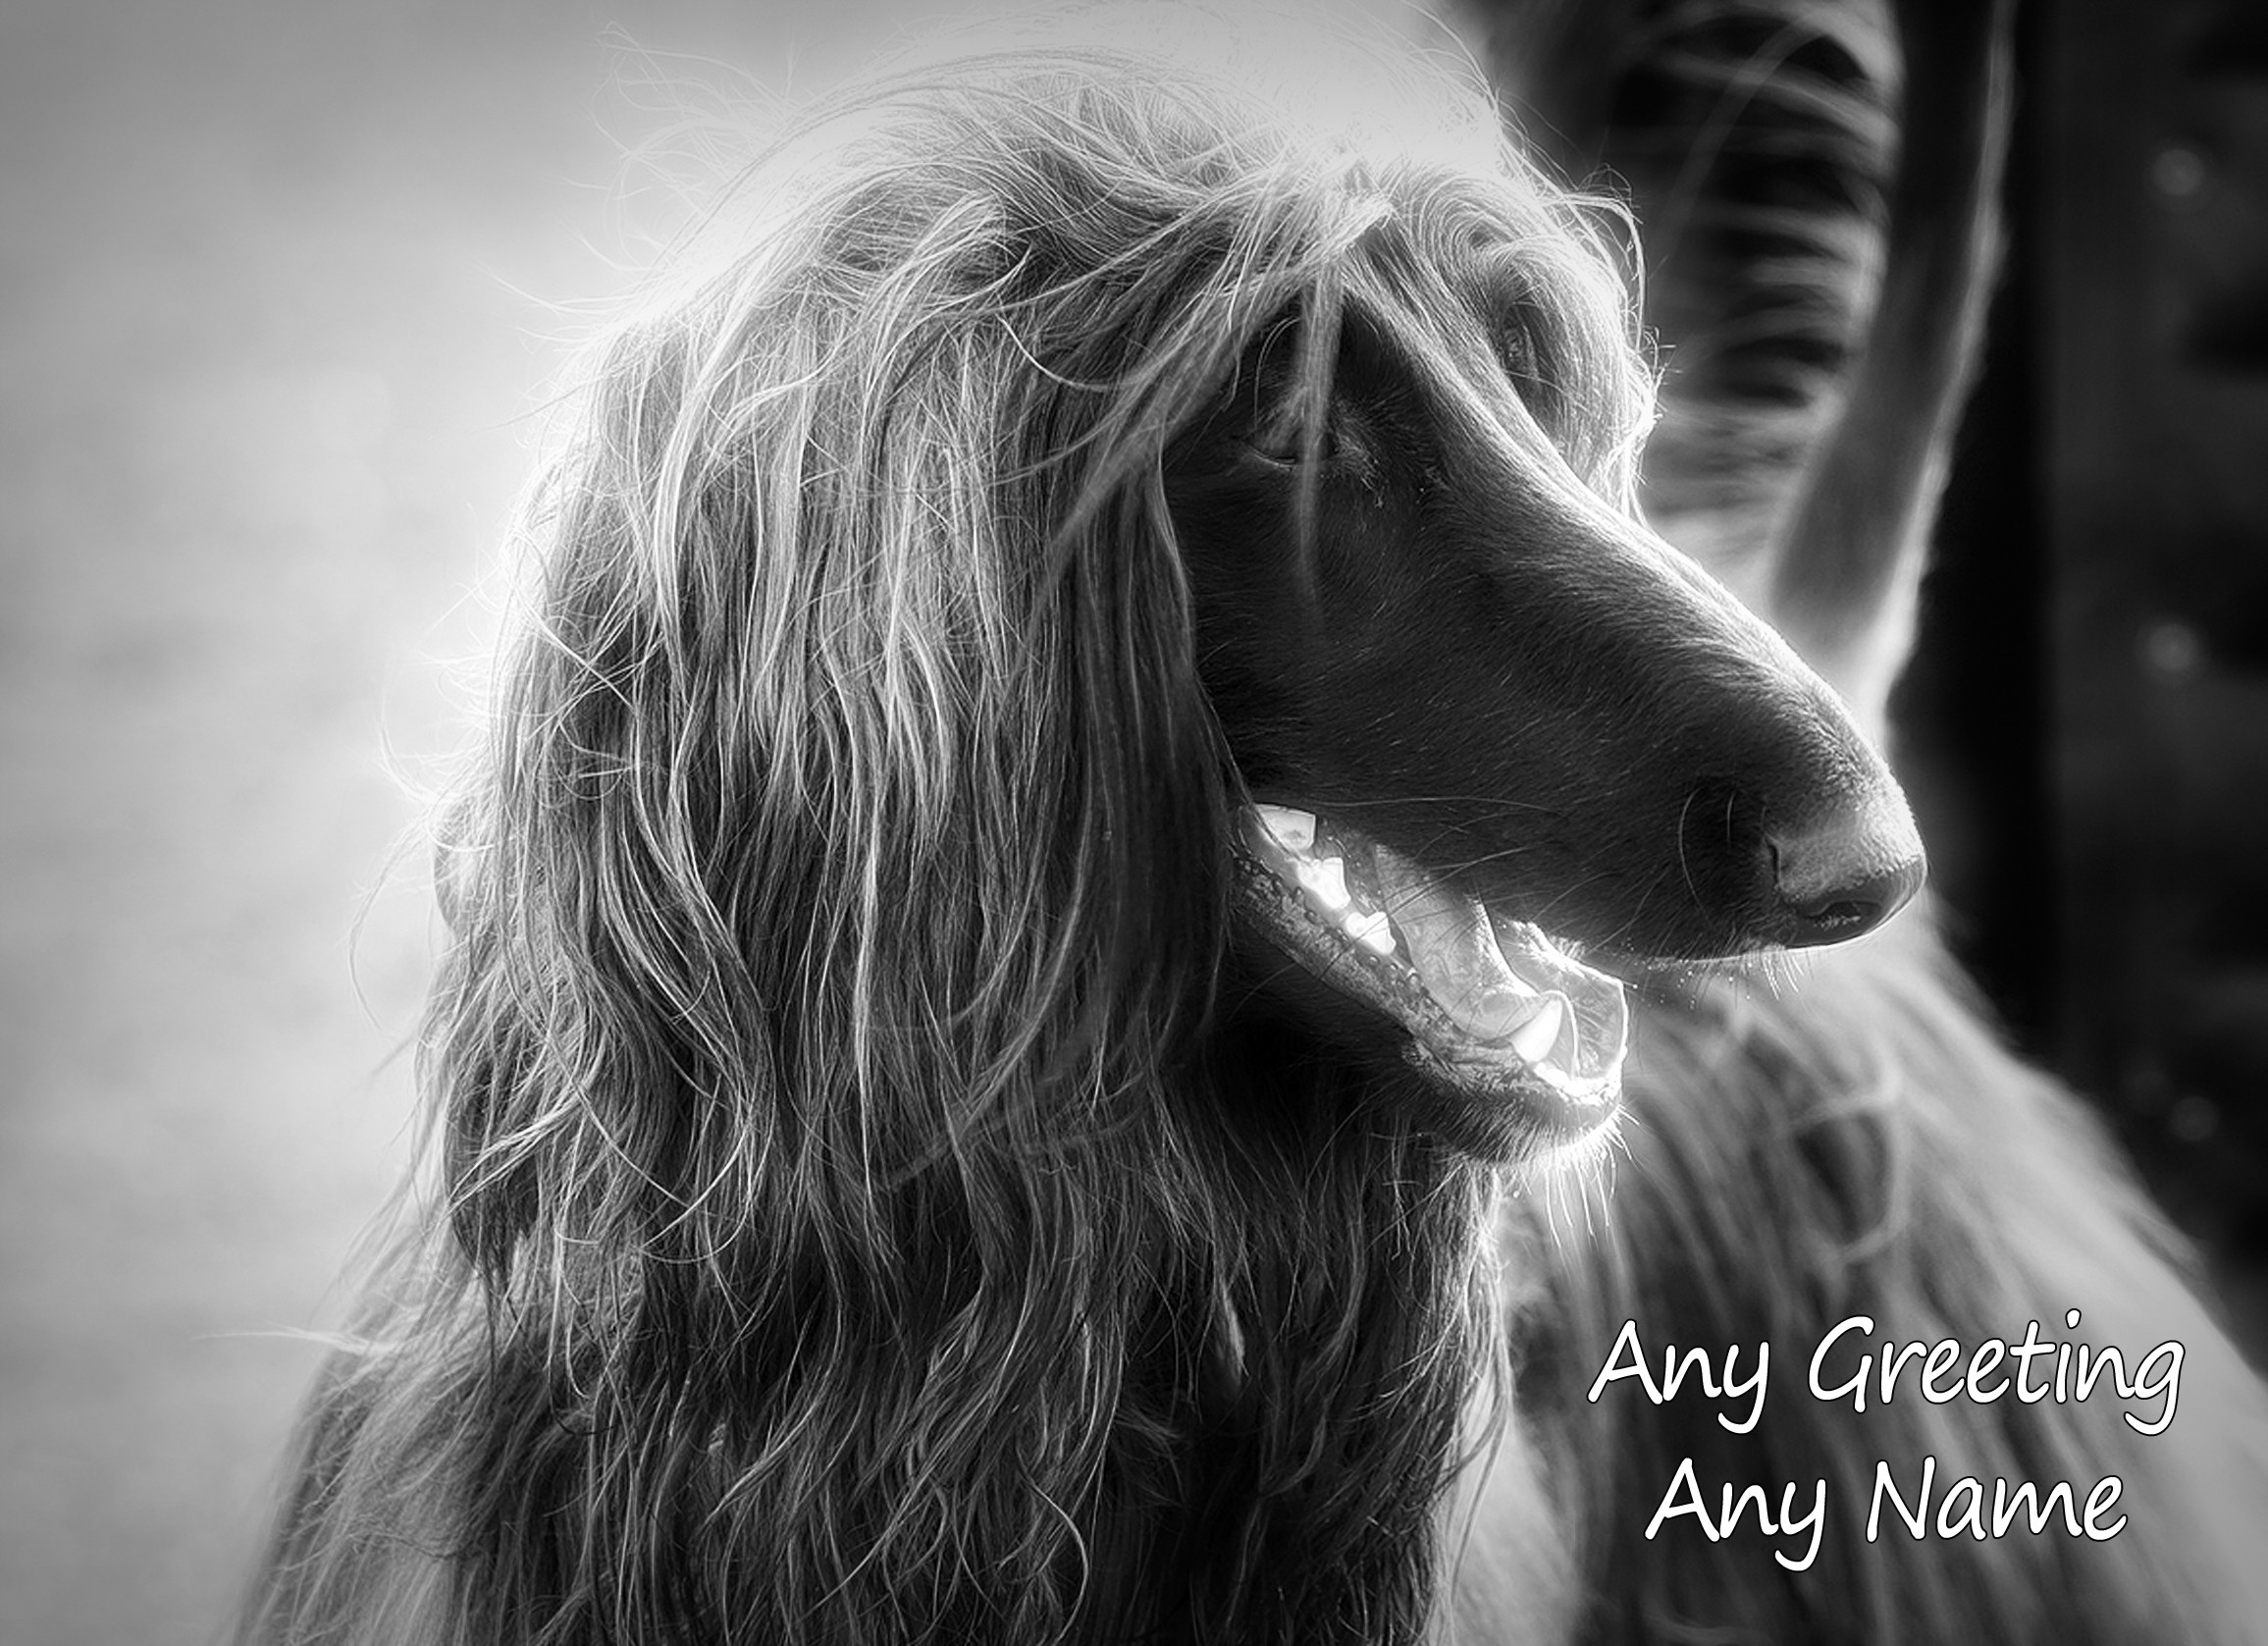 Personalised Afghan Hound Dog Black and White Art Greeting Card (Birthday, Christmas, Any Occasion)